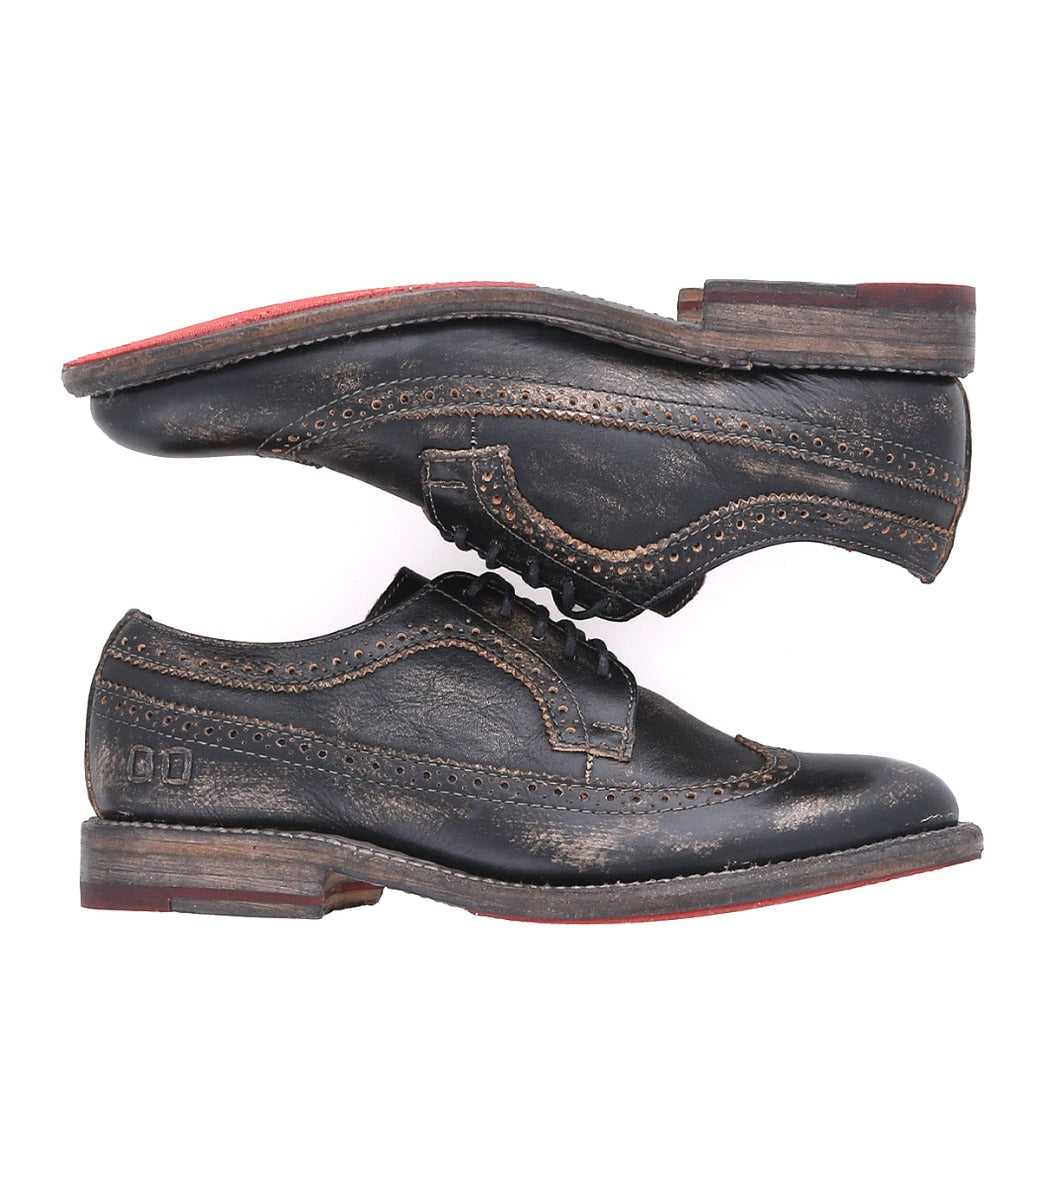 A pair of Bed Stu Lita K II wingtip oxford shoes with red soles.